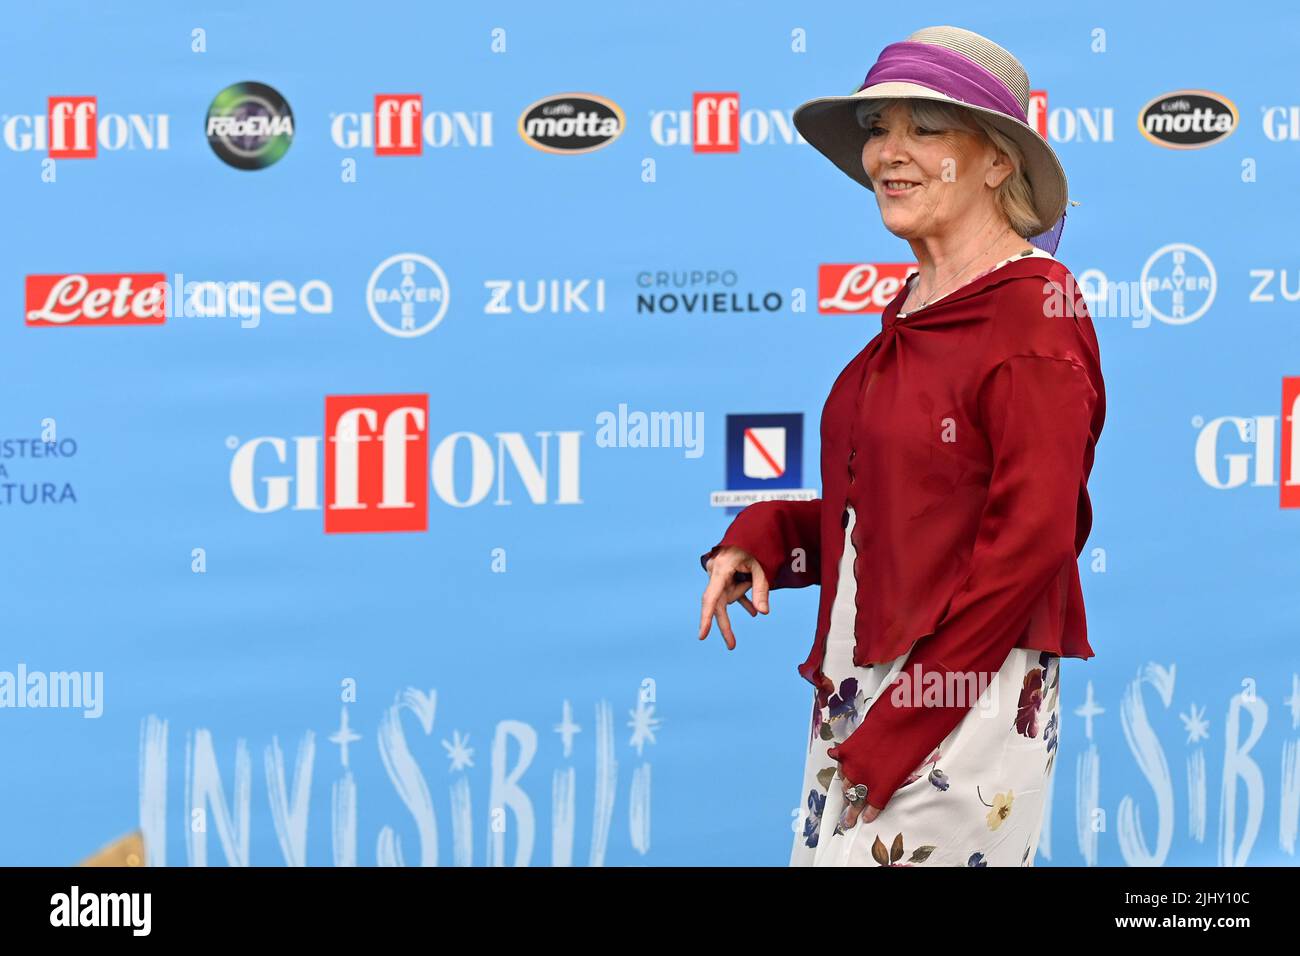 GIFFONI VALLE PIANA, ITALY - JULY 21: Caterina Caselli attend the photocall at the Giffoni Film Festival 2022 on July 21, 2022 in Giffoni Valle Piana, Stock Photo